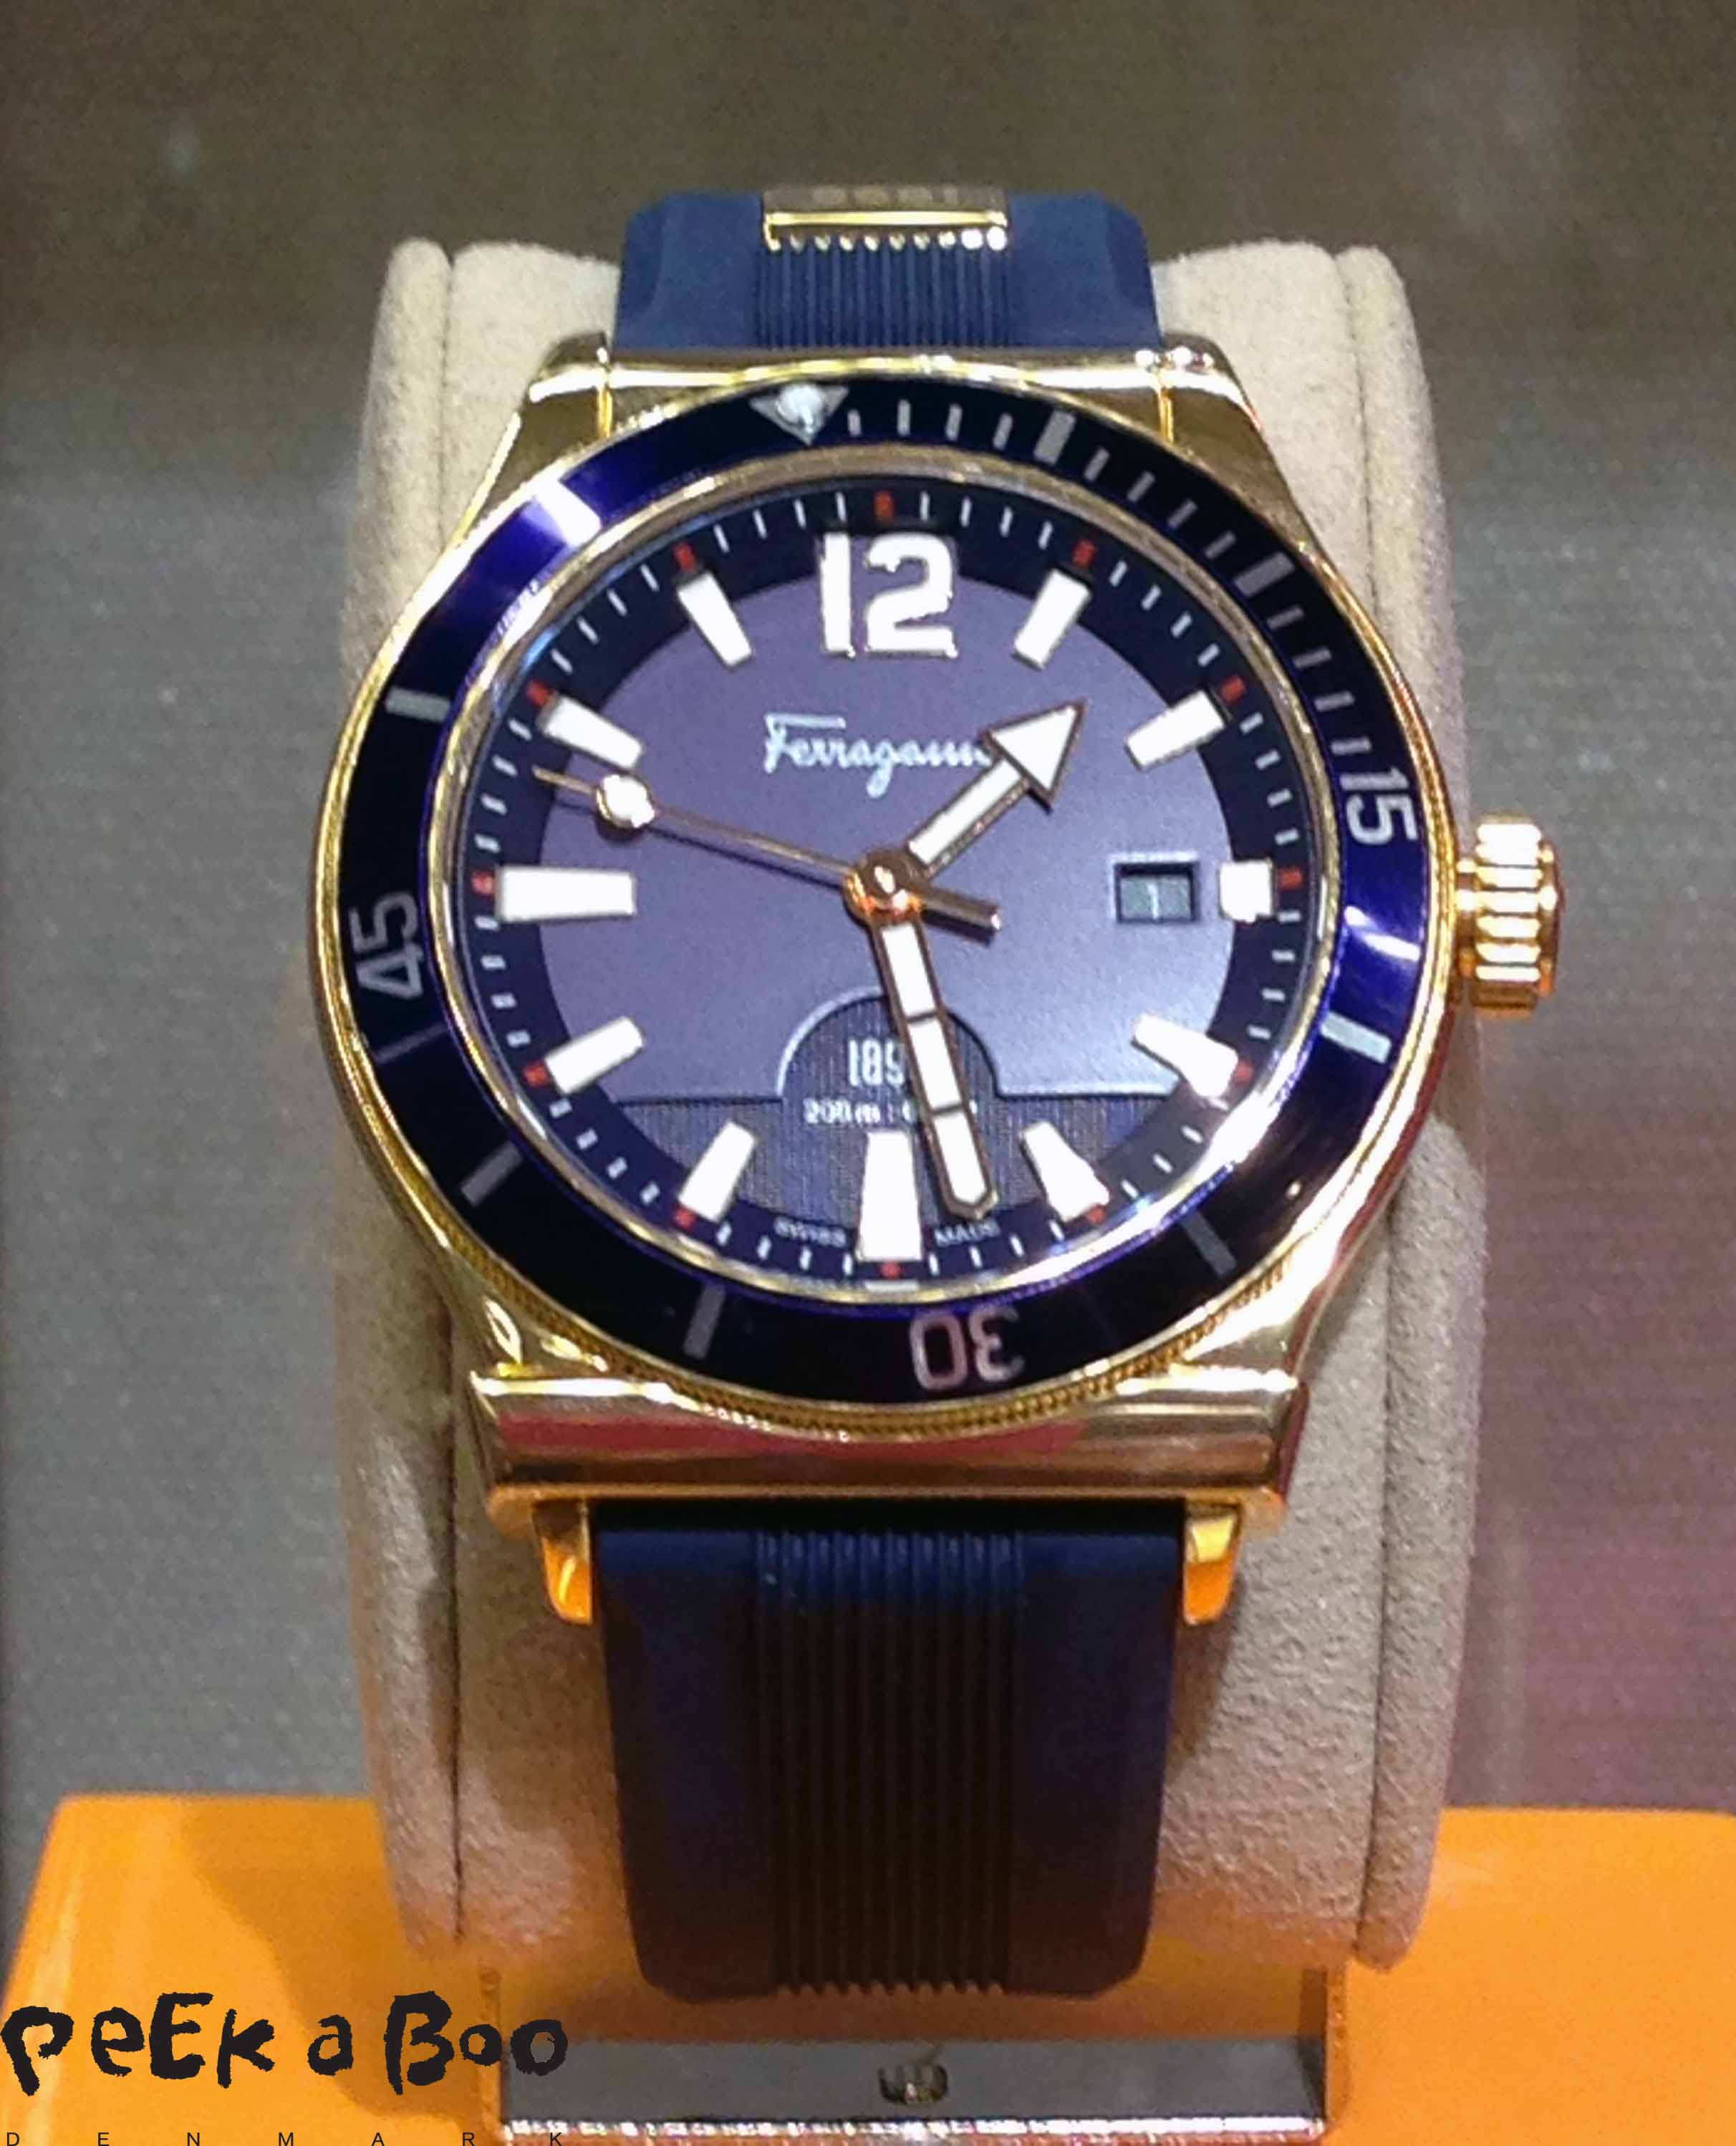 Ferragamo showed thhis beautiful blue Watch. A major trend is the blue watches.